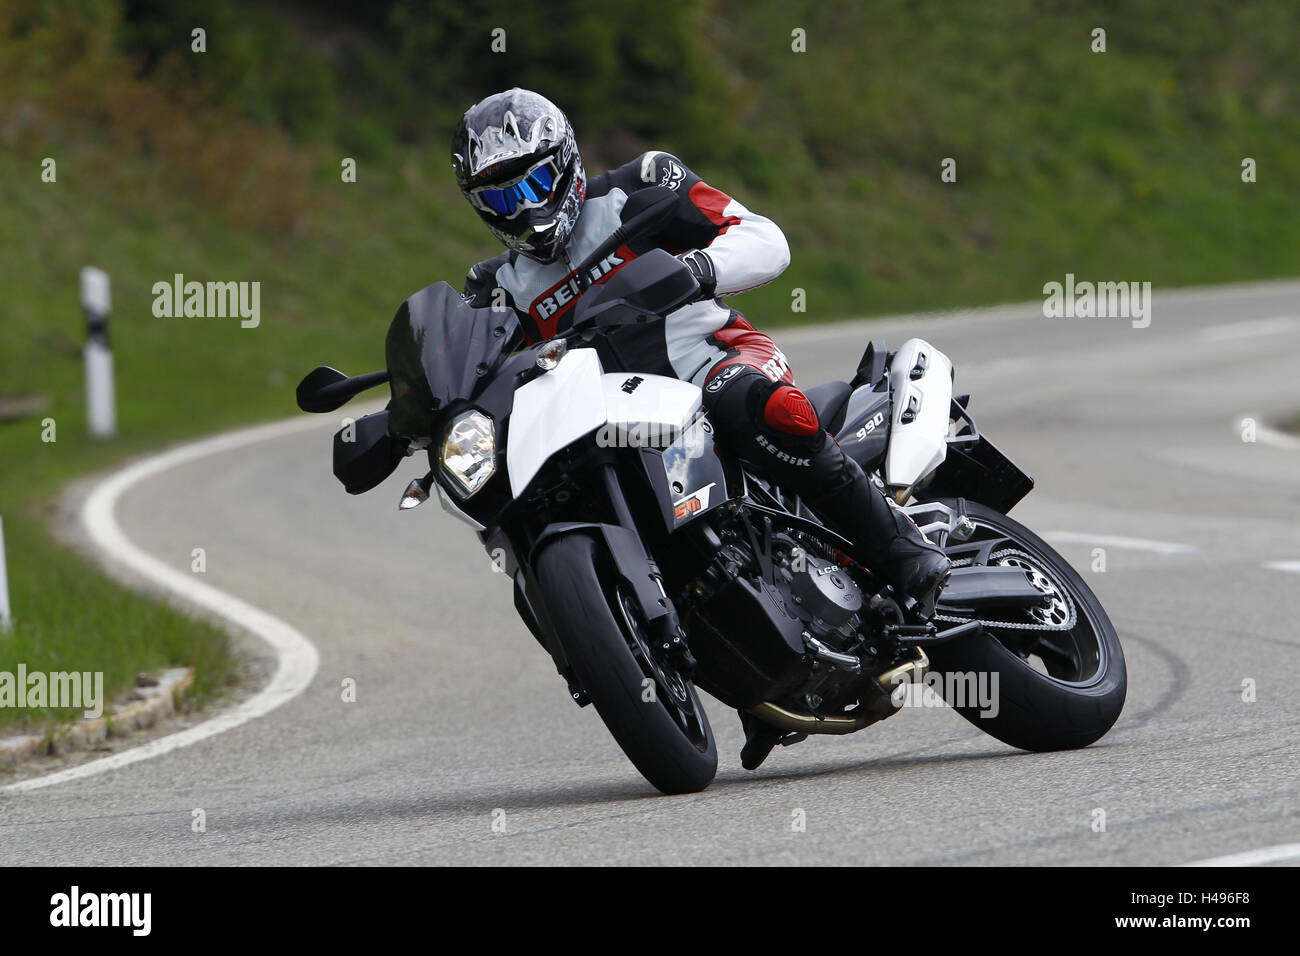 Motorcyclist, KTM LC 8 990, Anbremsdrift, bends, country road, dynamically, Stock Photo